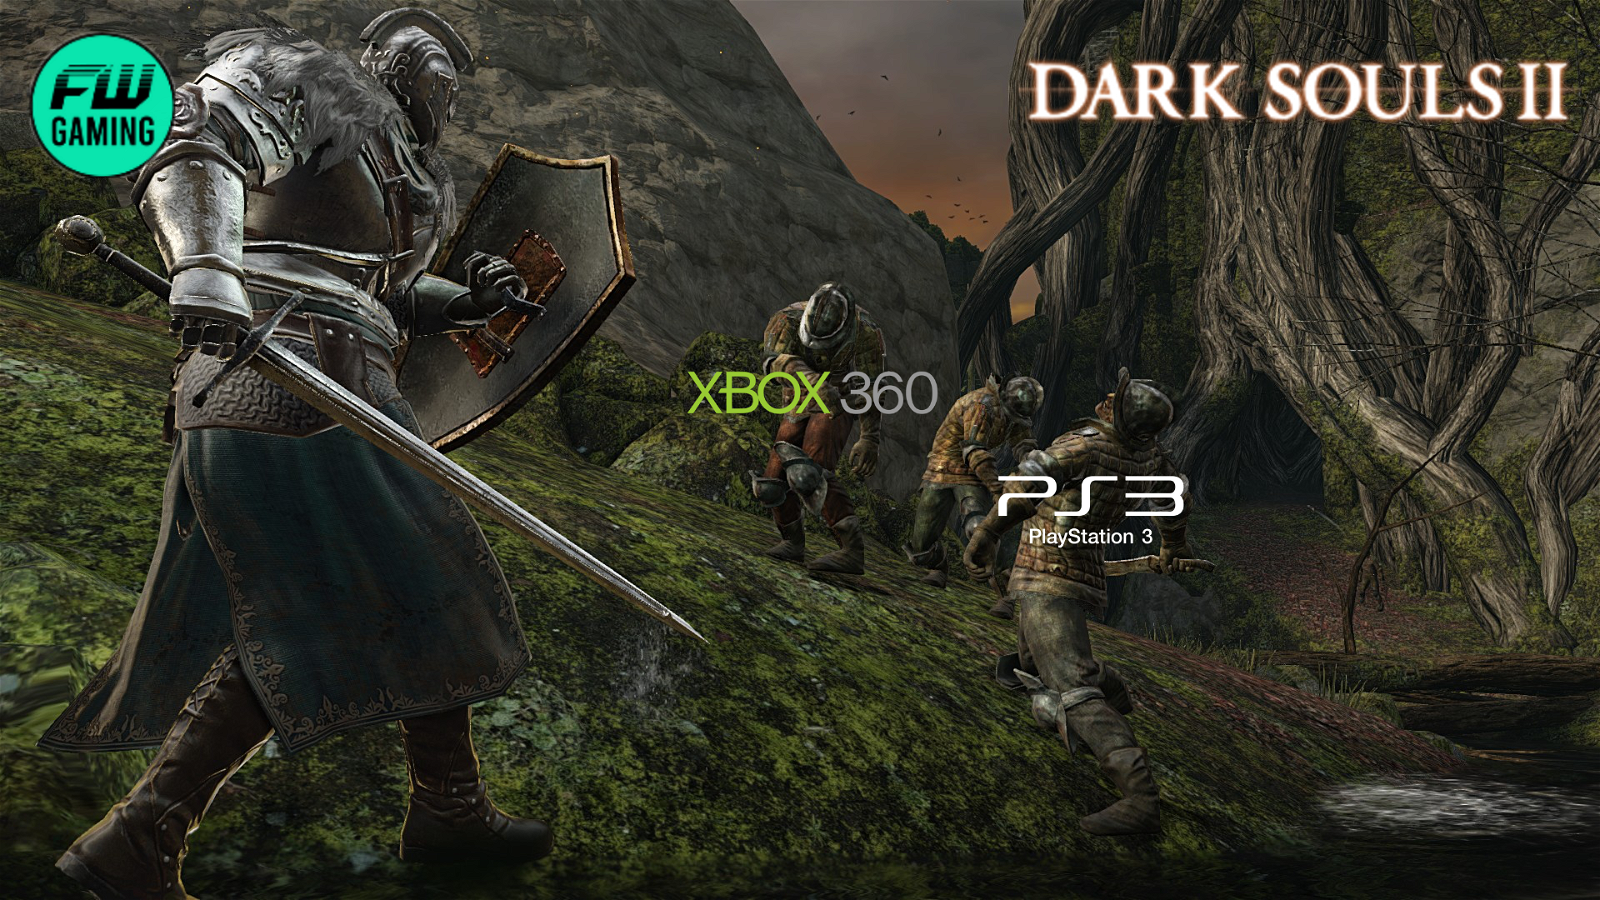 Dark Souls 2 Set to Shut Down Servers on PS3 and Xbox 360